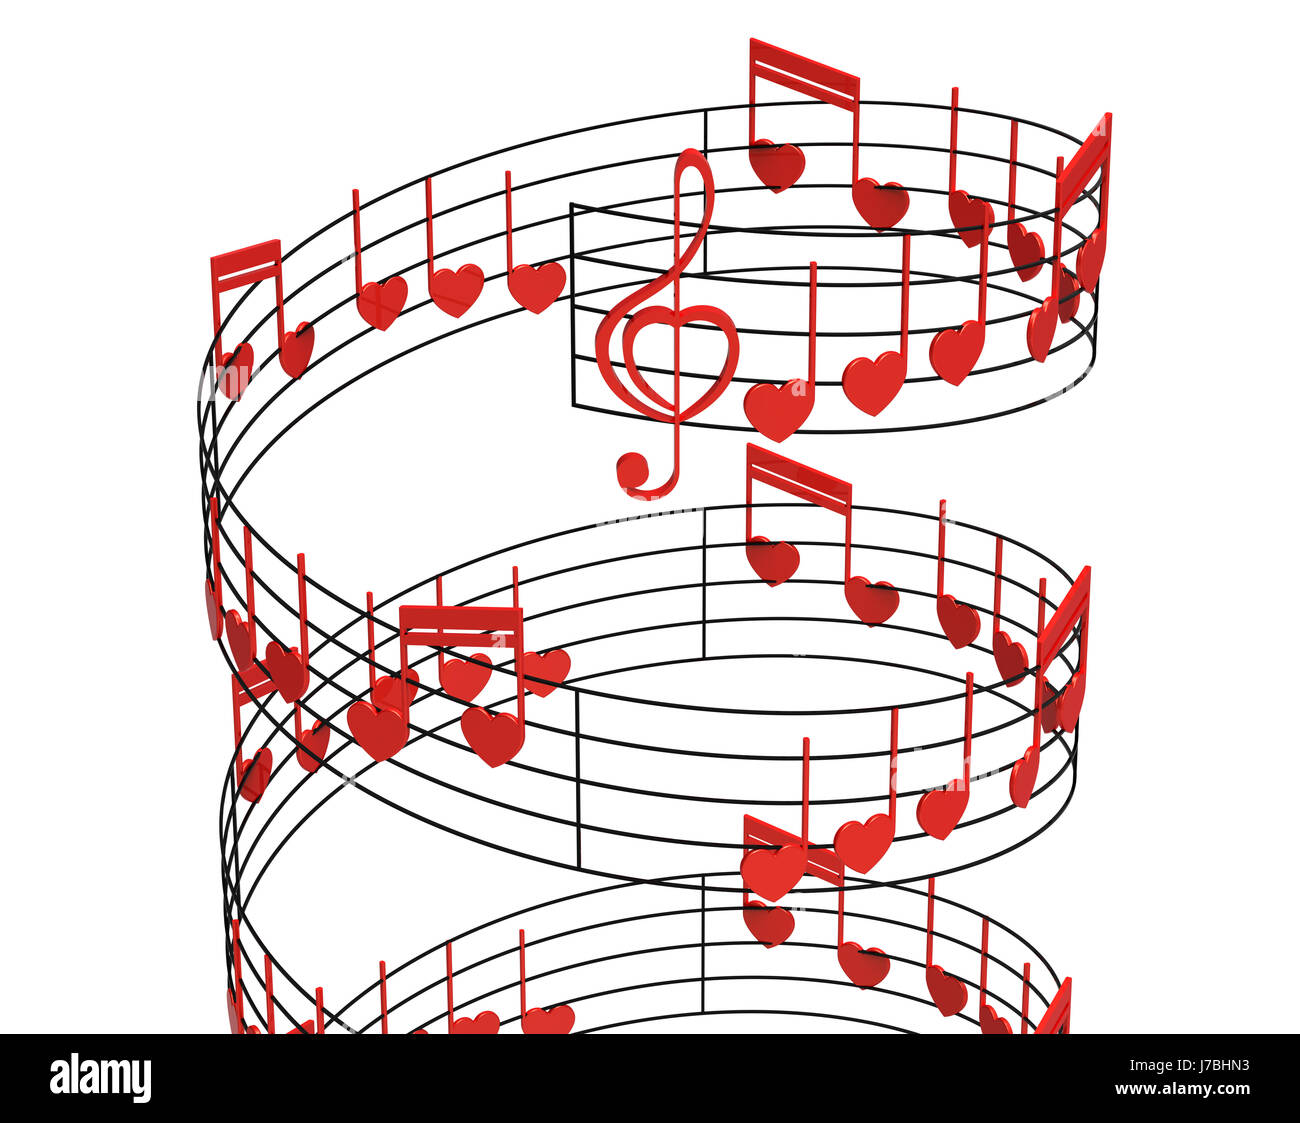 Music Concept Heart High Resolution Stock Photography And Images Alamy